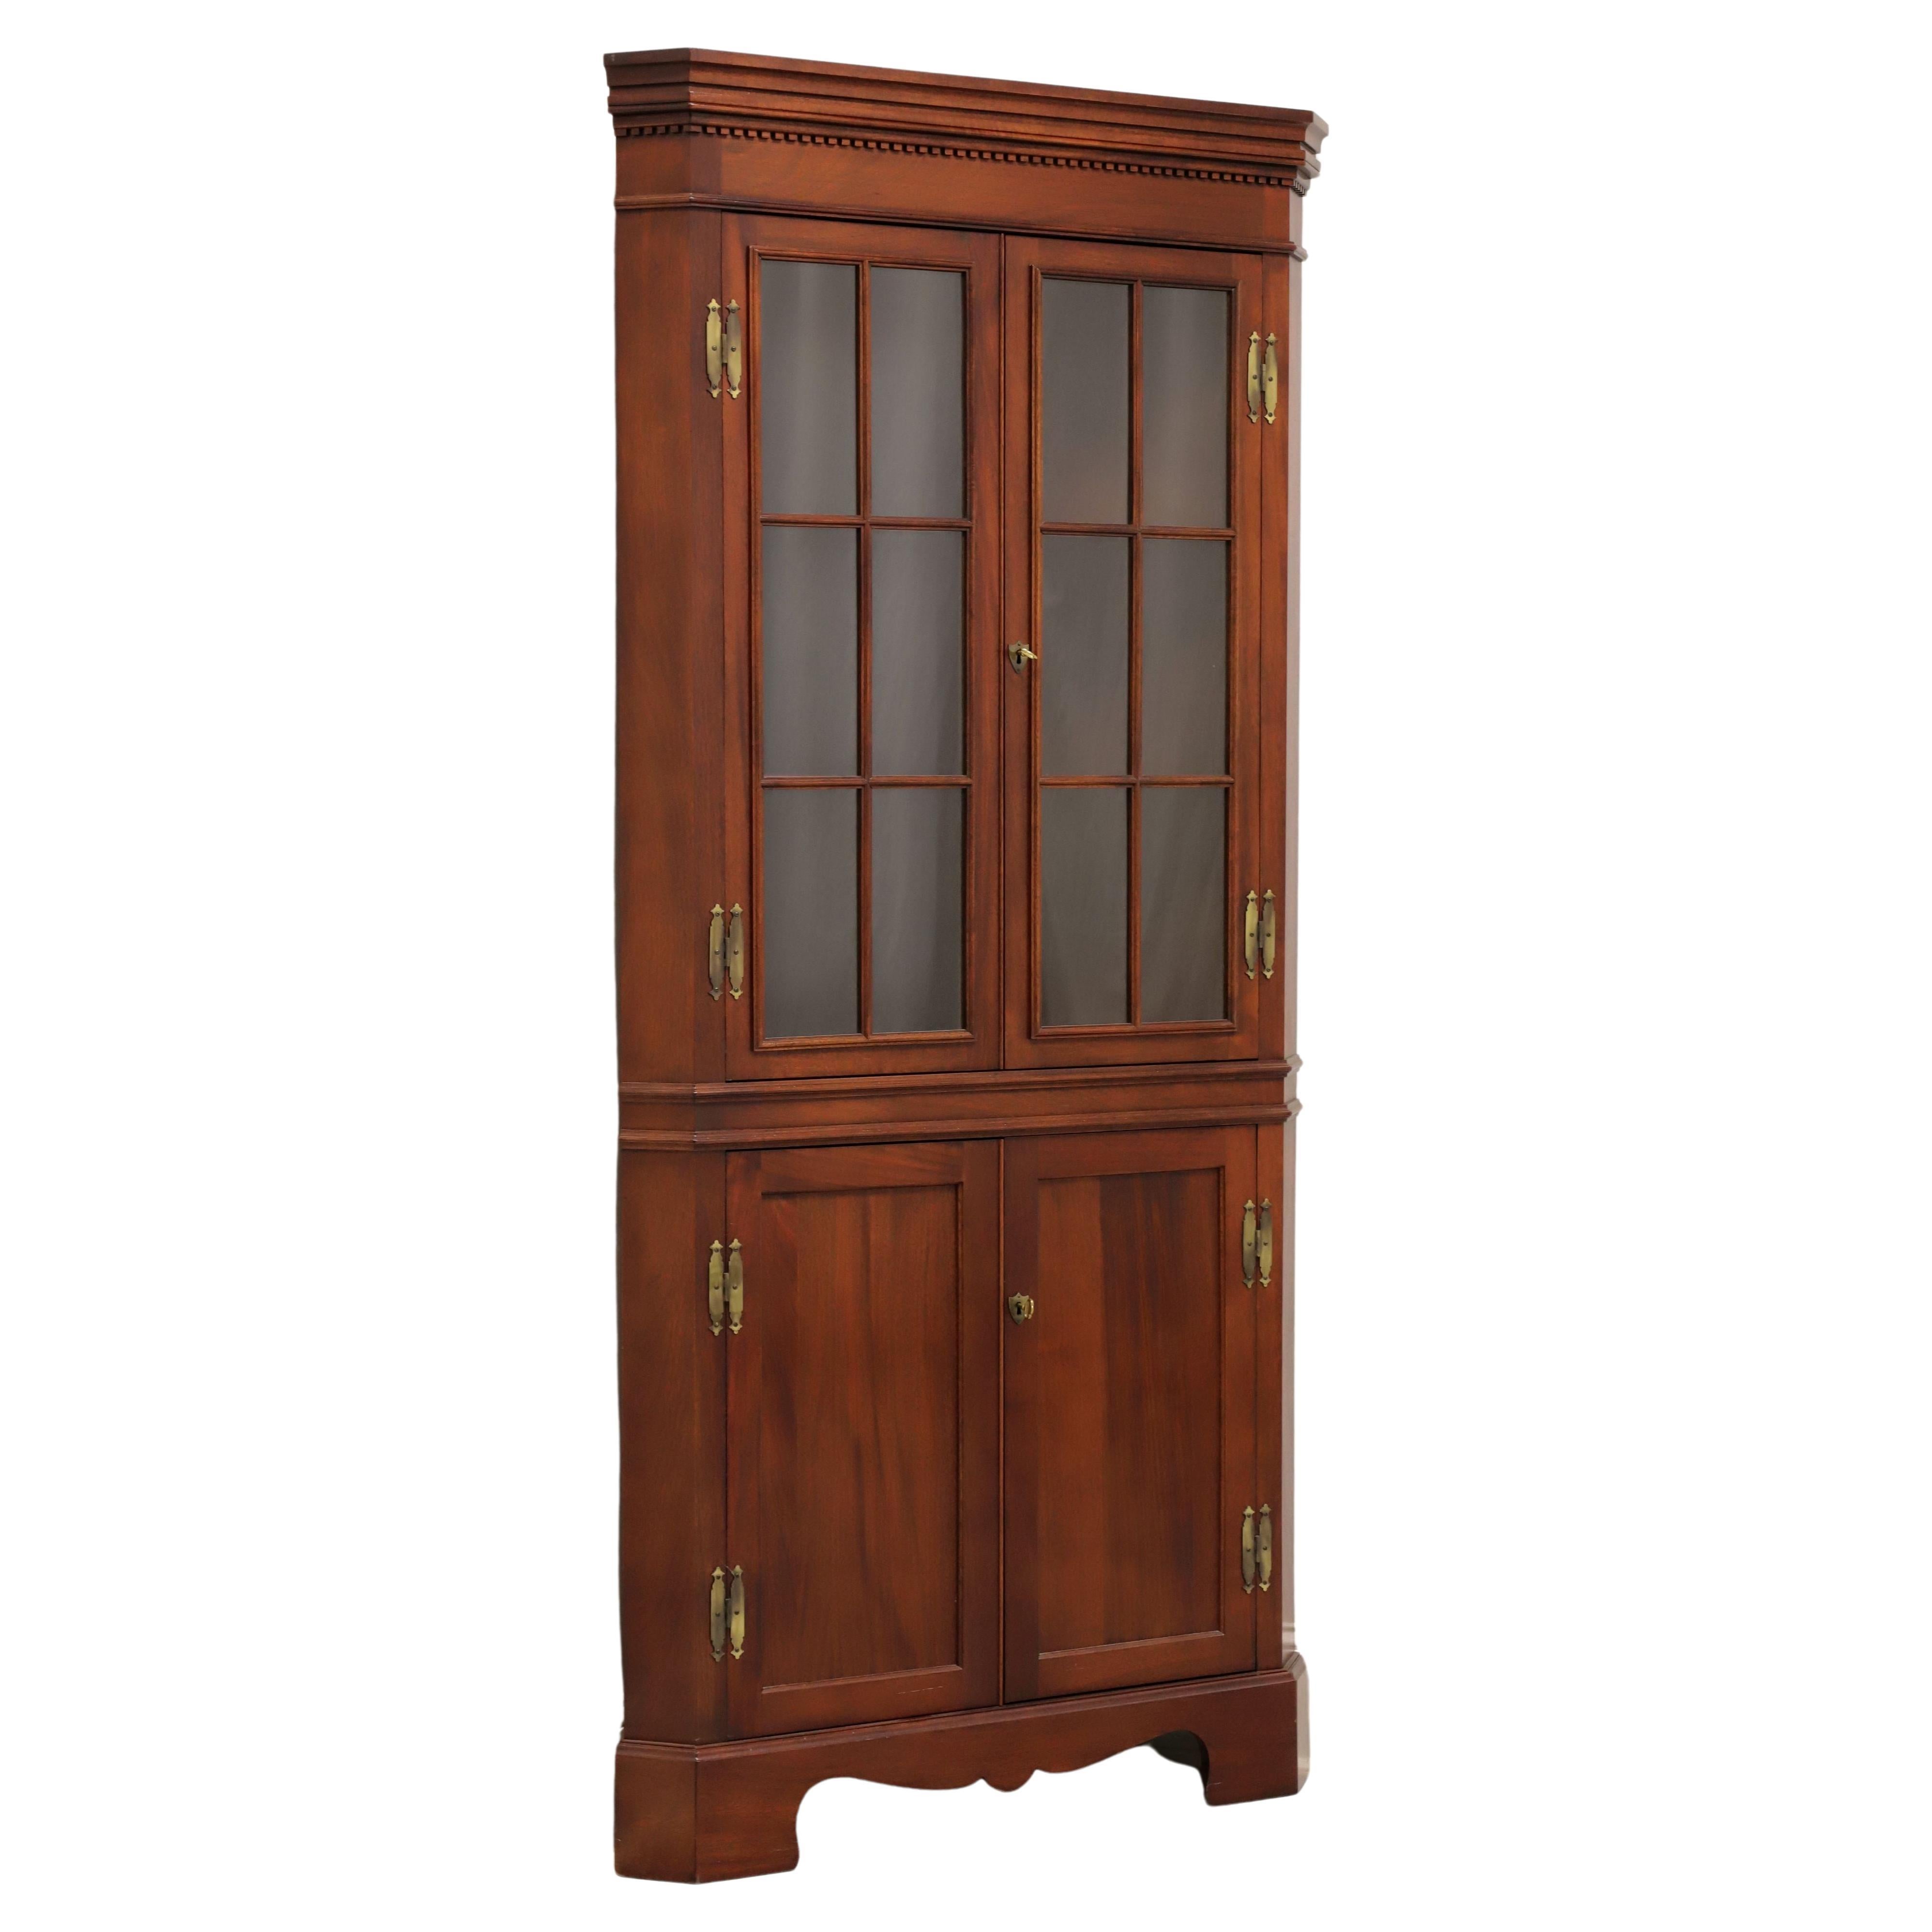 CRAFTIQUE Solid Mahogany Chippendale Style Corner Cupboard / Cabinet - D For Sale